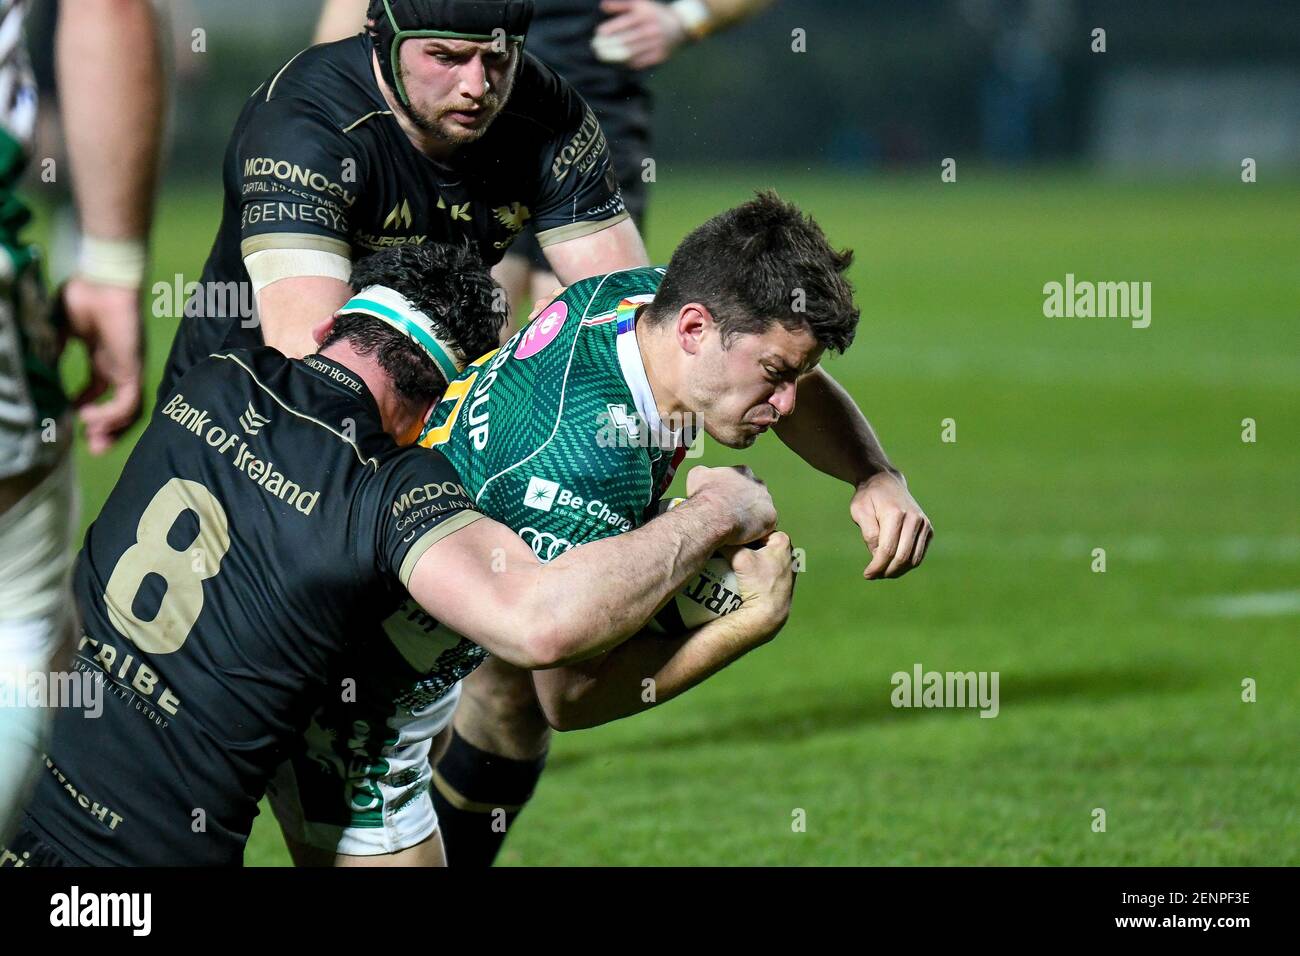 Treviso, Italy. 26th Feb, 2021. Joaquin Riera (Benetton Treviso) tackled by  Paul Boyle (Connacht) during Benetton Treviso vs Connacht Rugby, Rugby  Guinness Pro 14 match in Treviso, Italy, February 26 2021 Credit: